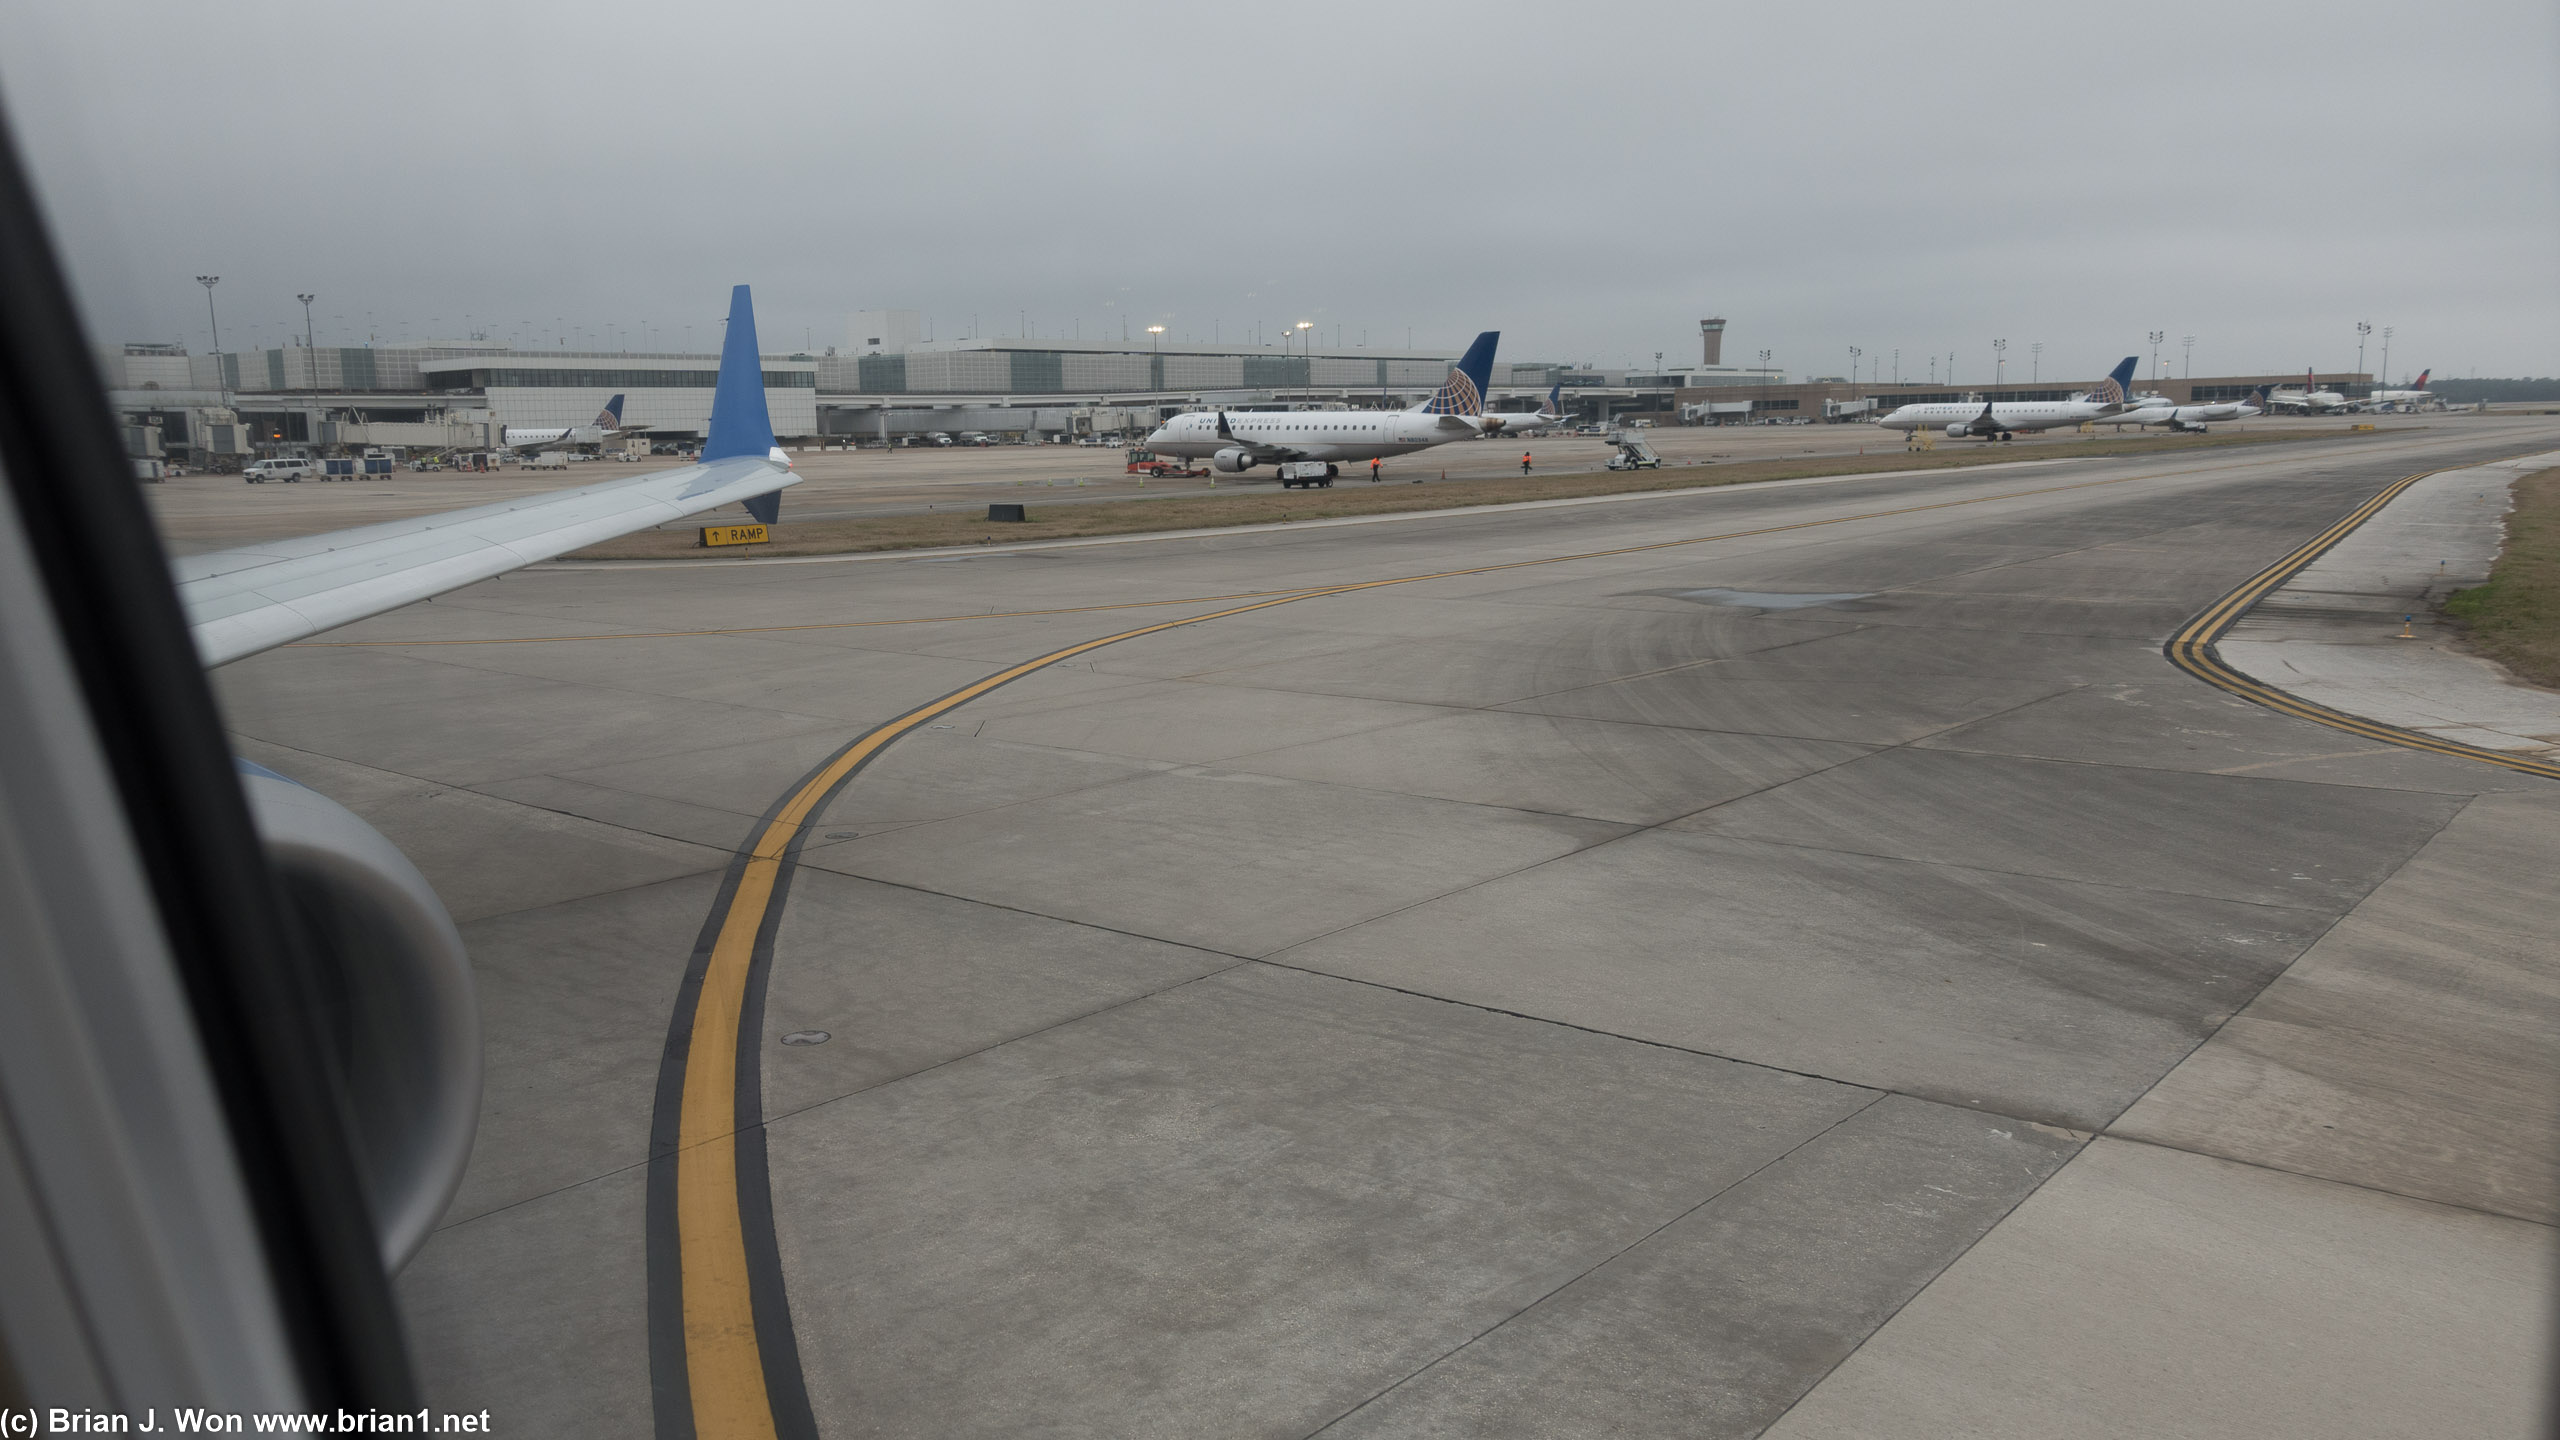 United Express Embraer 175's on the tarmac.